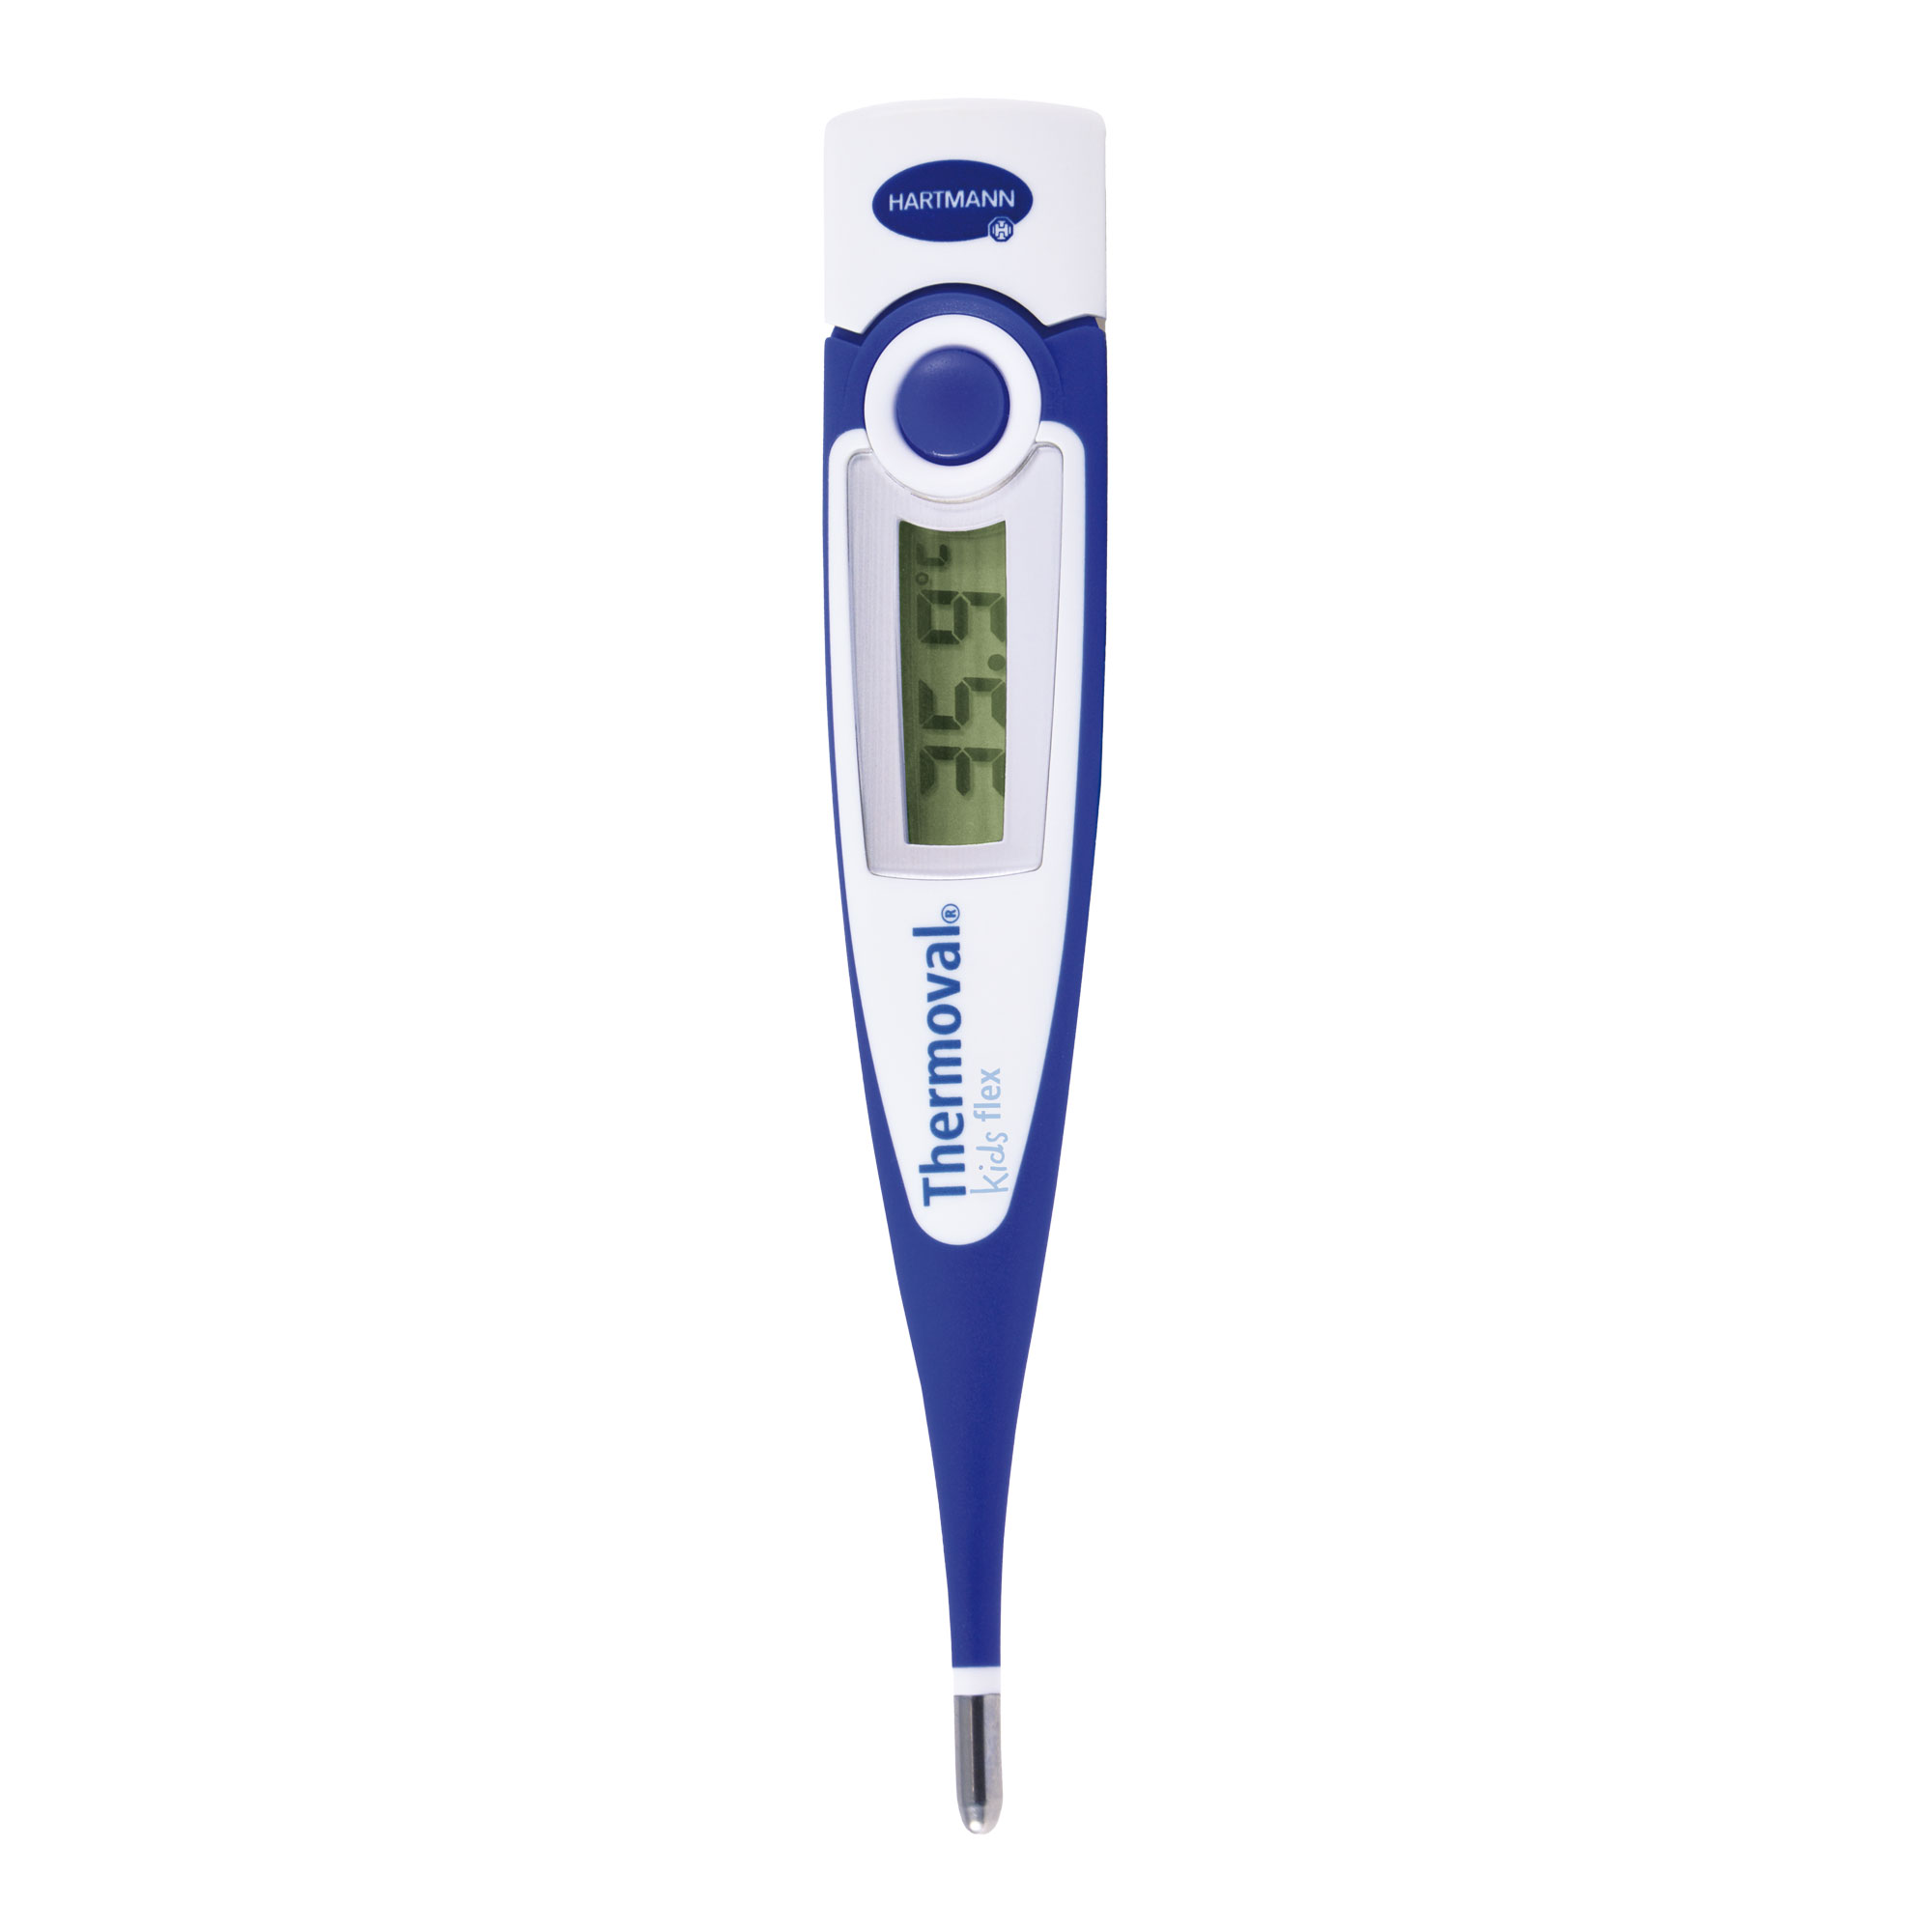 Thermoval kids flex Fieberthermometer ohne Umverpackung